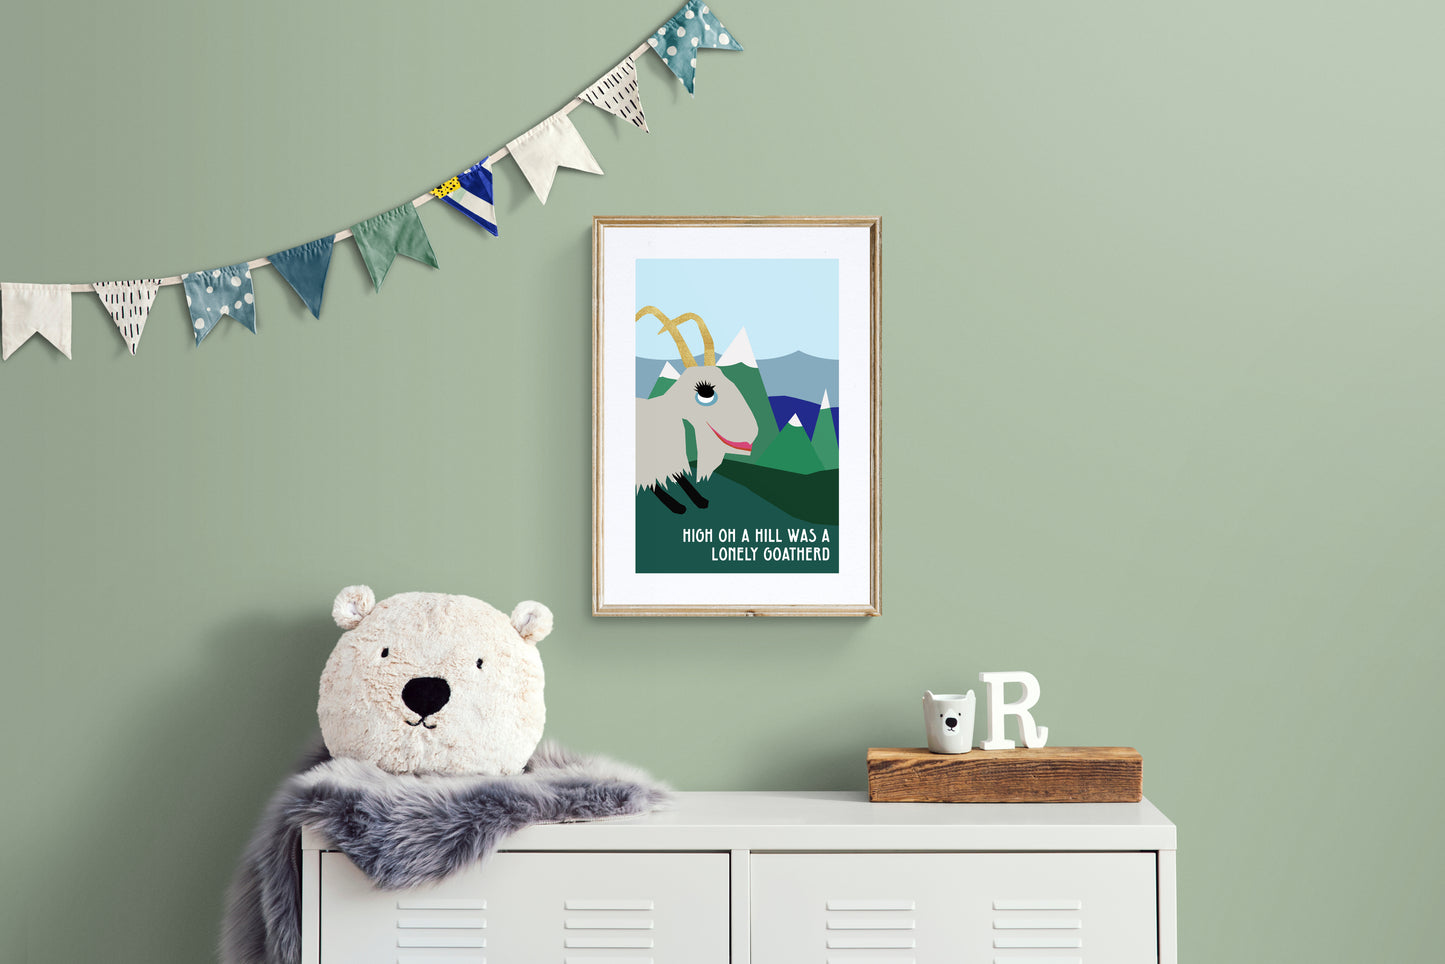 High on a hill was a lonely goatherd - sound of music art poster for kids room featuring goat puppets from the movie, Sound of Music